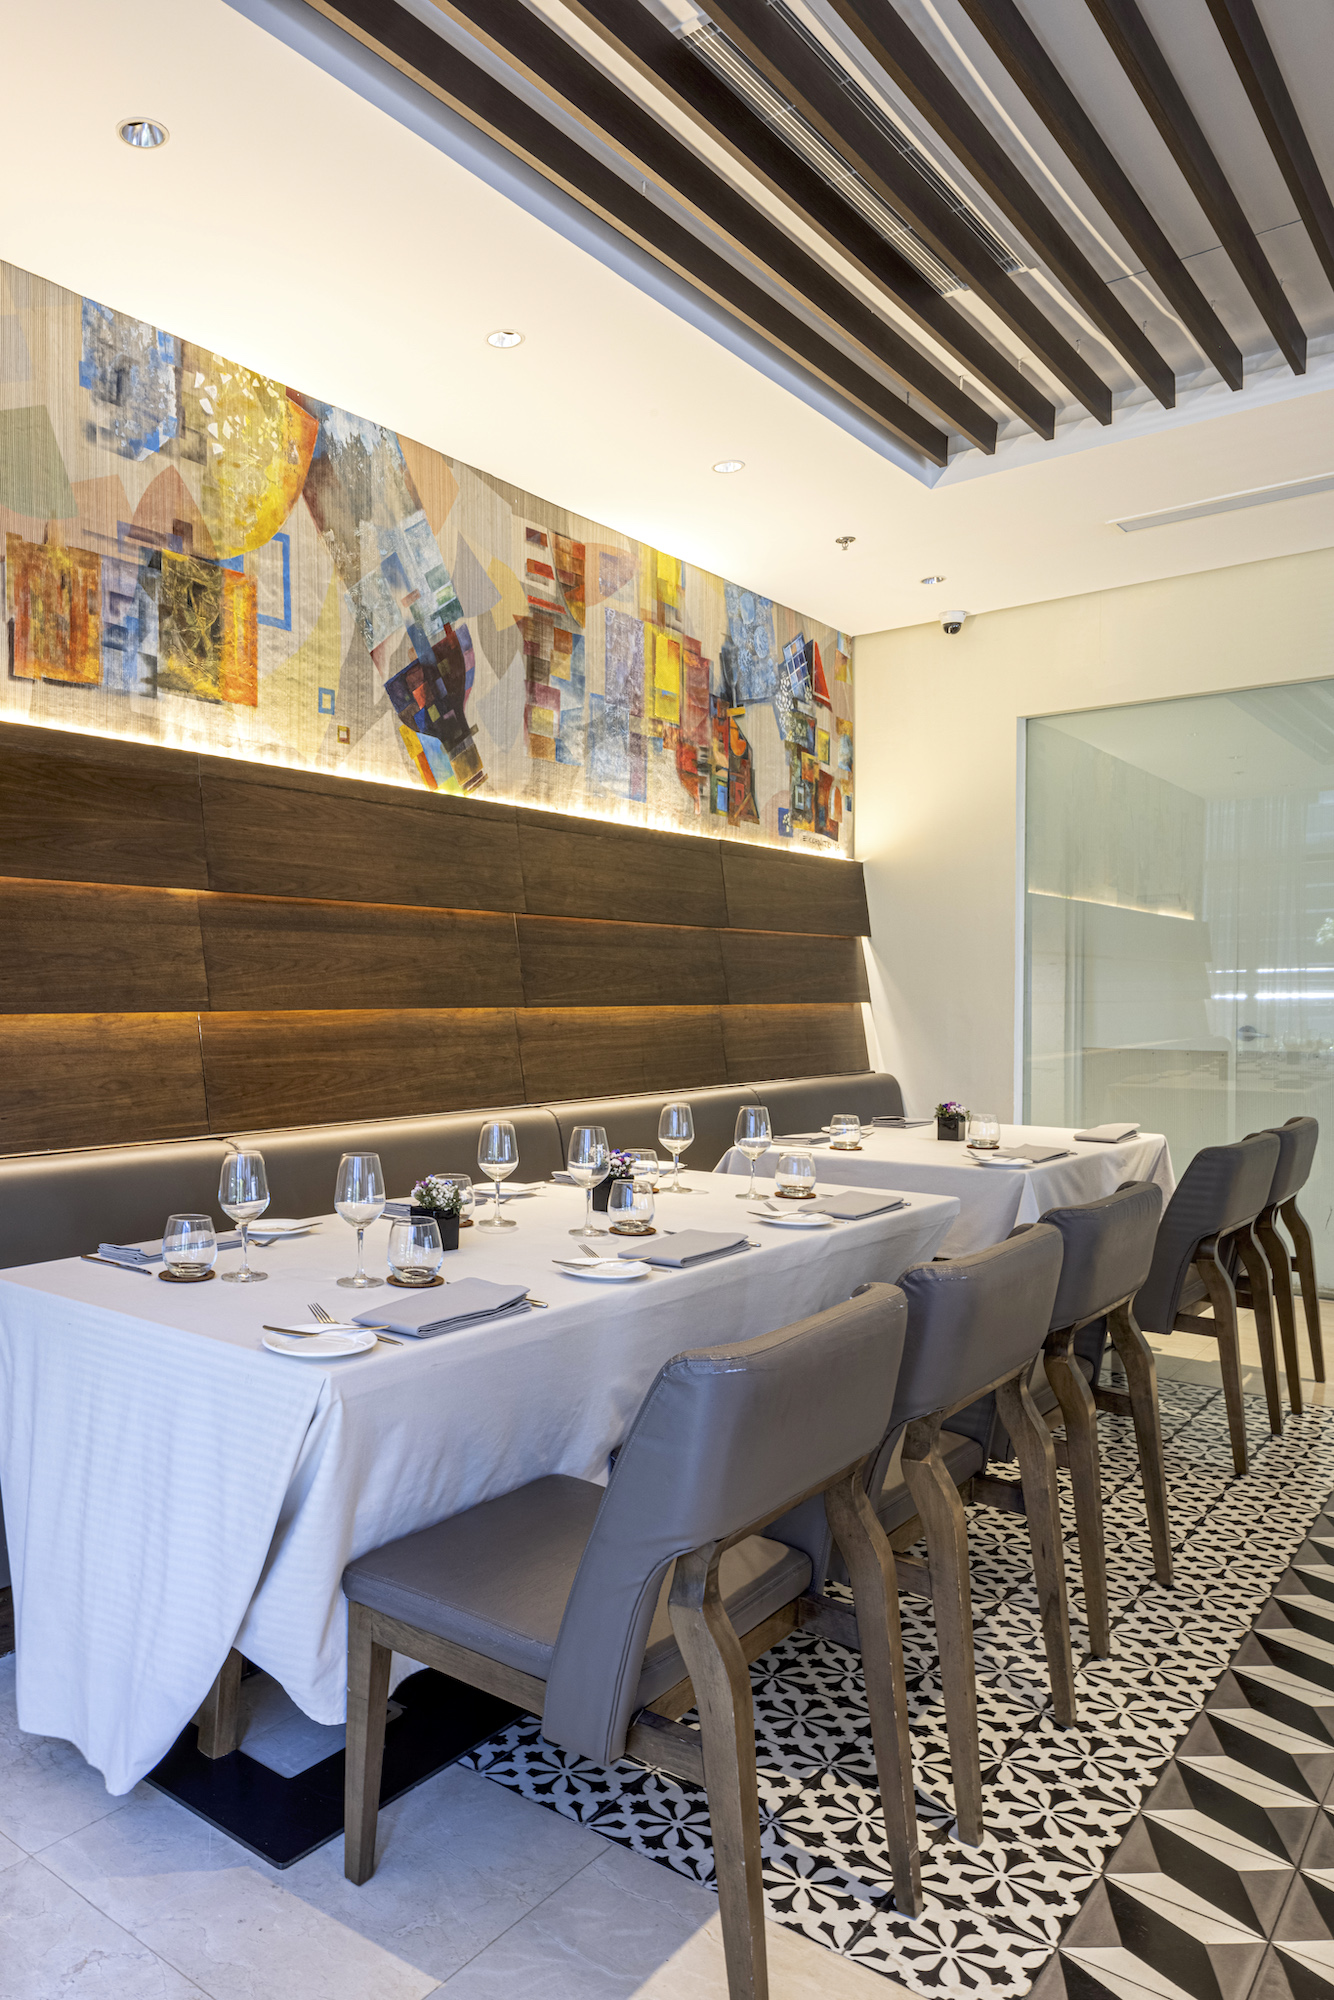 If you're leaning towards indoor dining, Tiago's interiors are equally palatable affairs